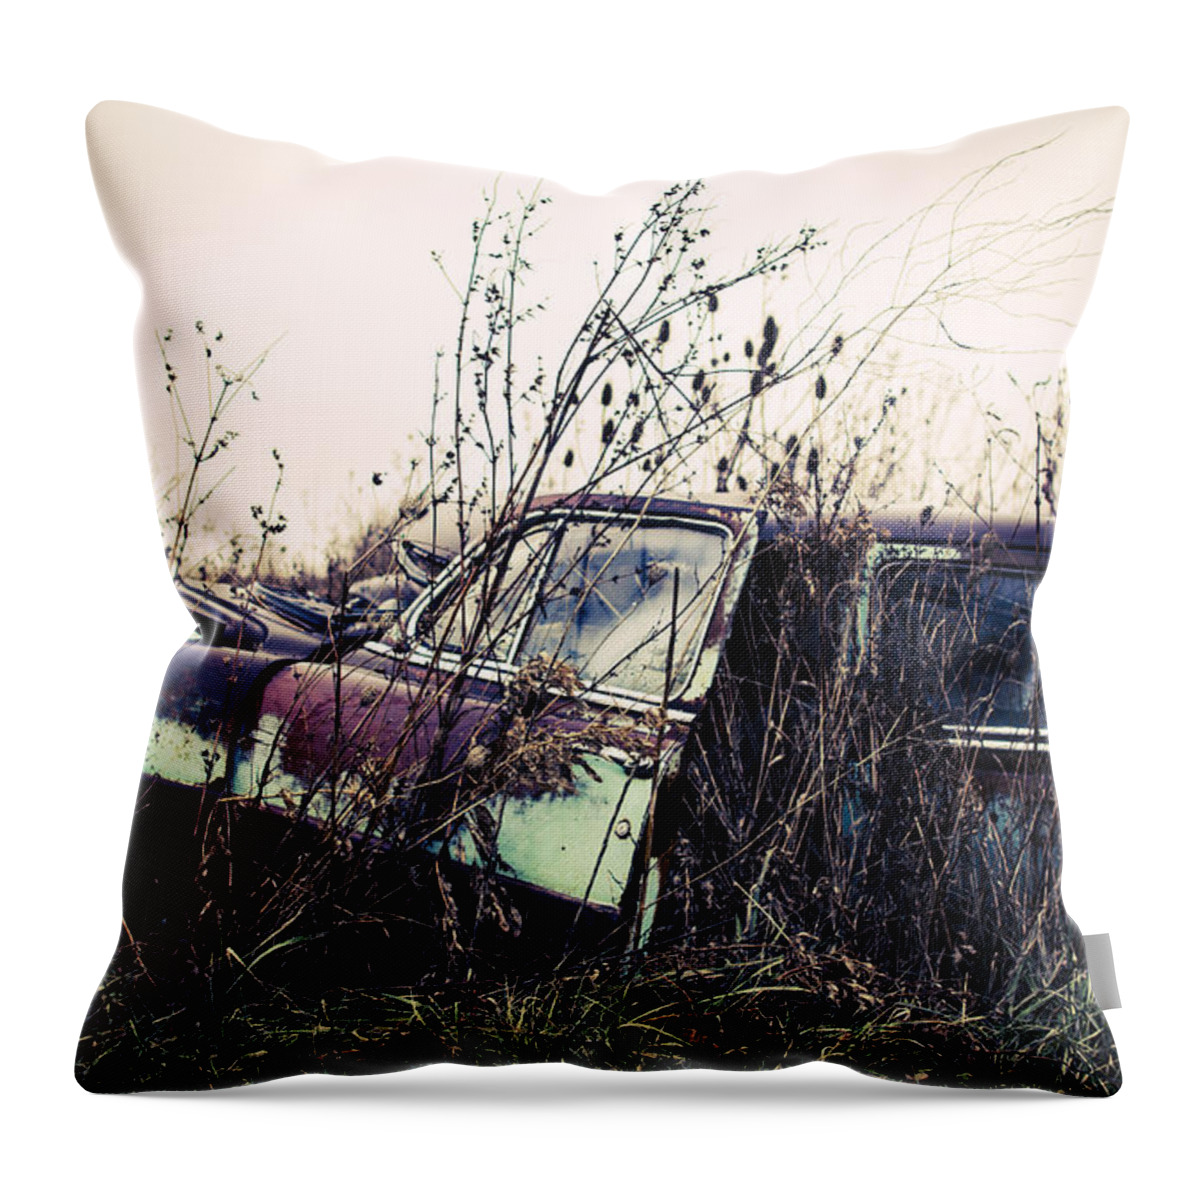 Abandoned Throw Pillow featuring the photograph Return To The Earth by Off The Beaten Path Photography - Andrew Alexander